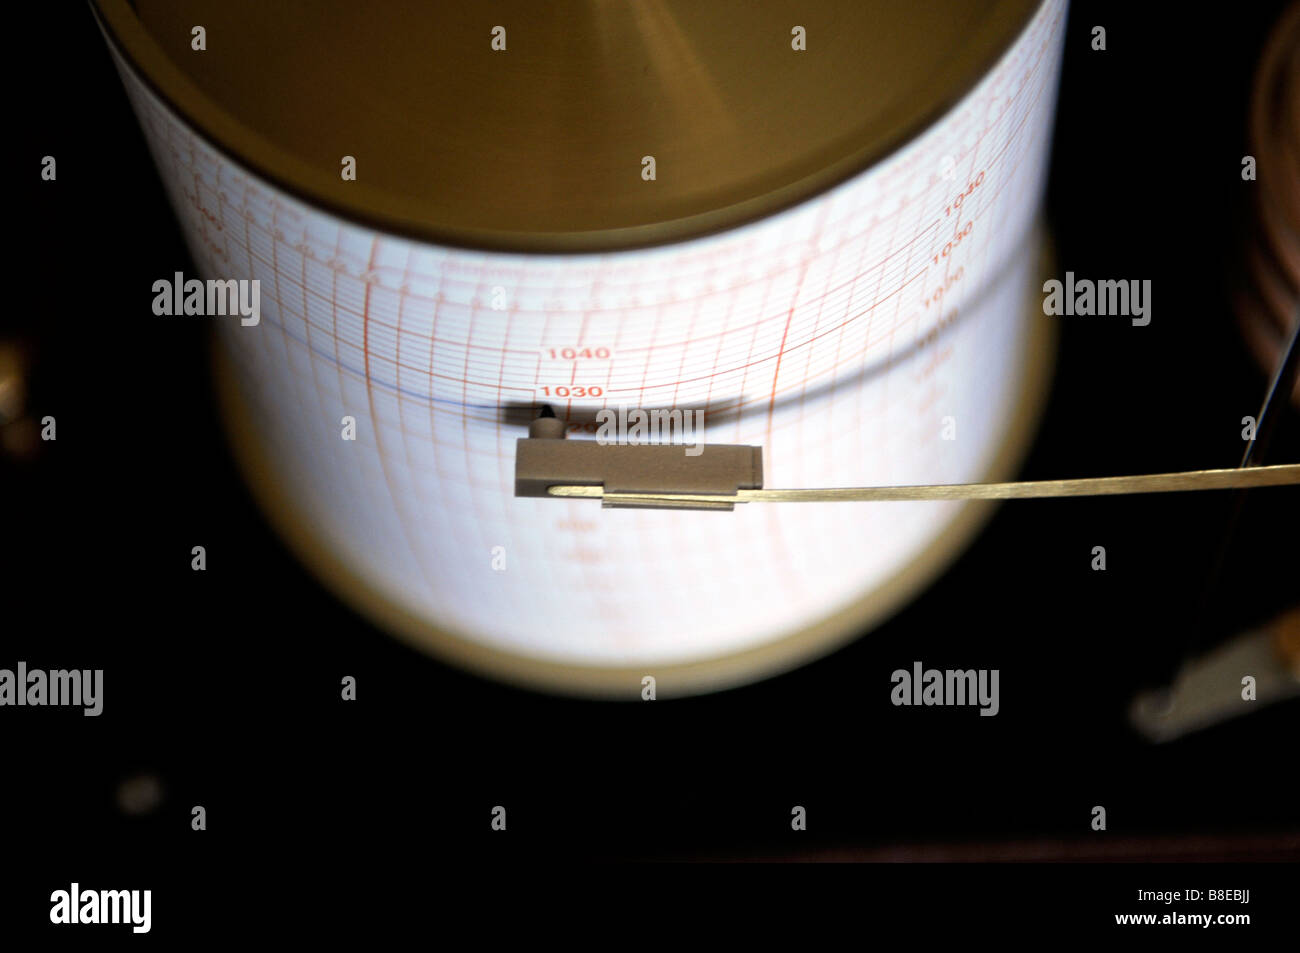 A barogaph used for weather forecasting measuring the barometric pressure Stock Photo